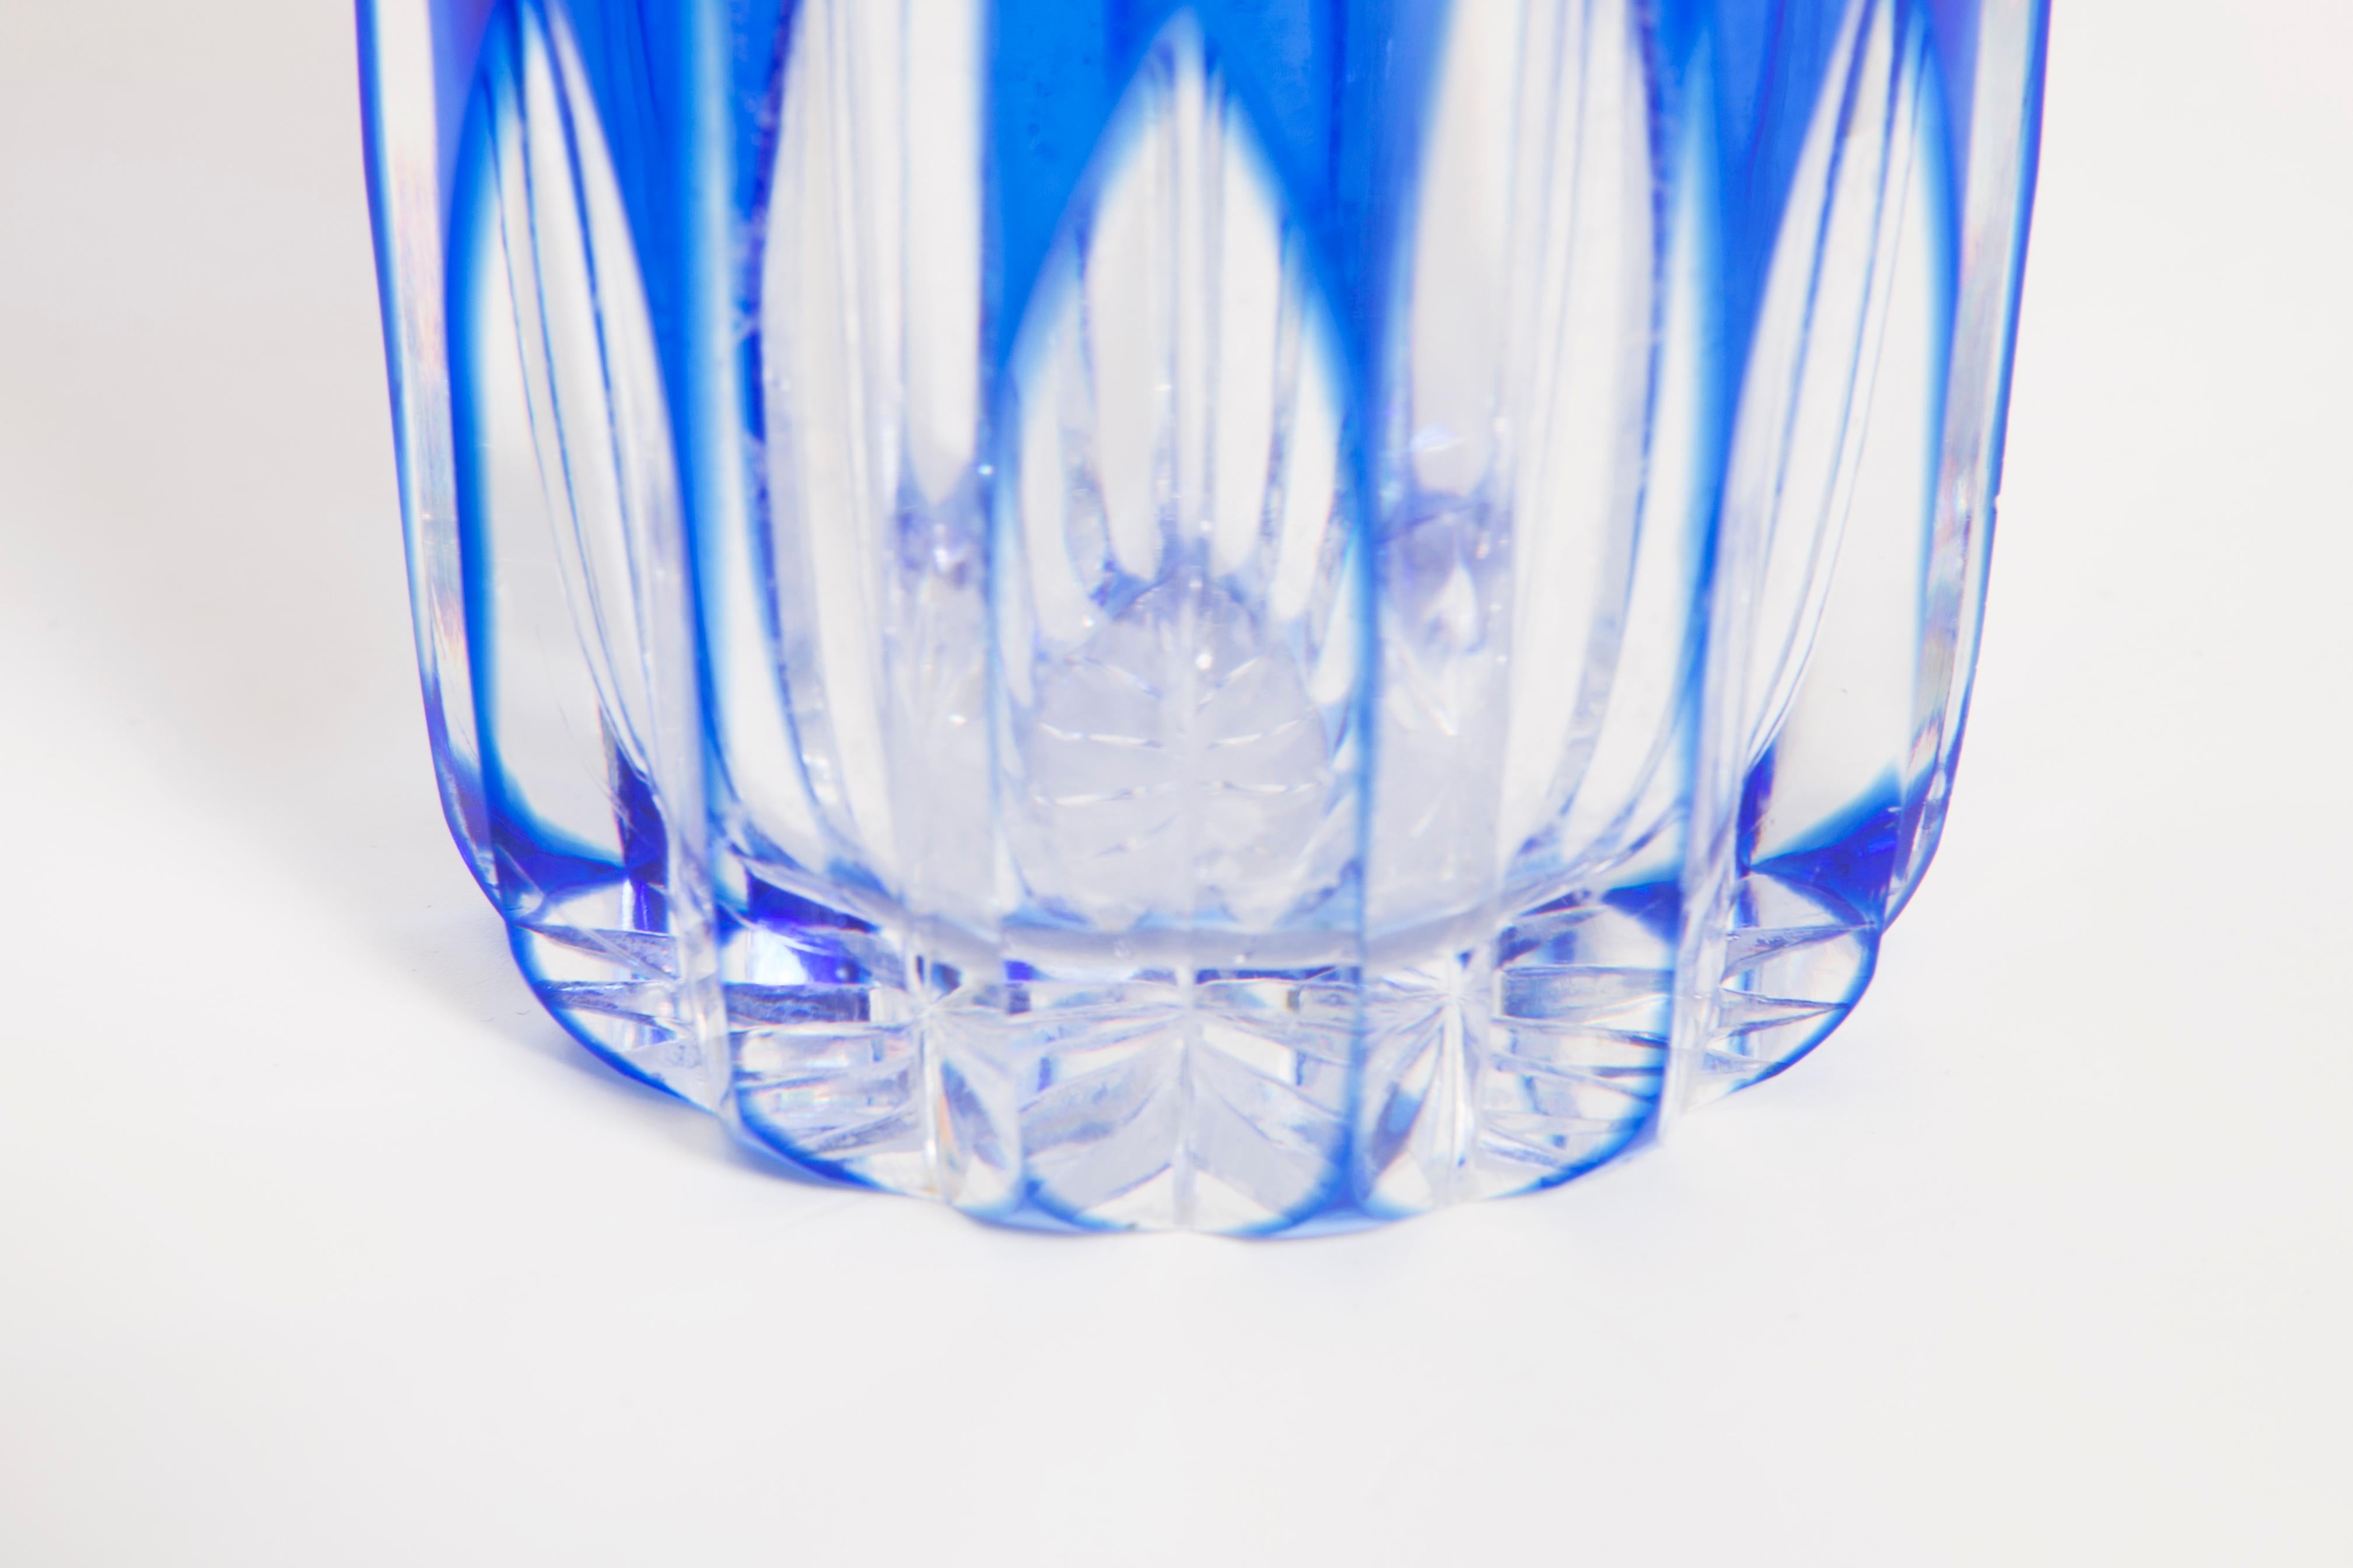 Mid-Century Modern Cobalt Blue Glass Decanter with Stopper and Glasses, 20th Century, Europe, 1960s